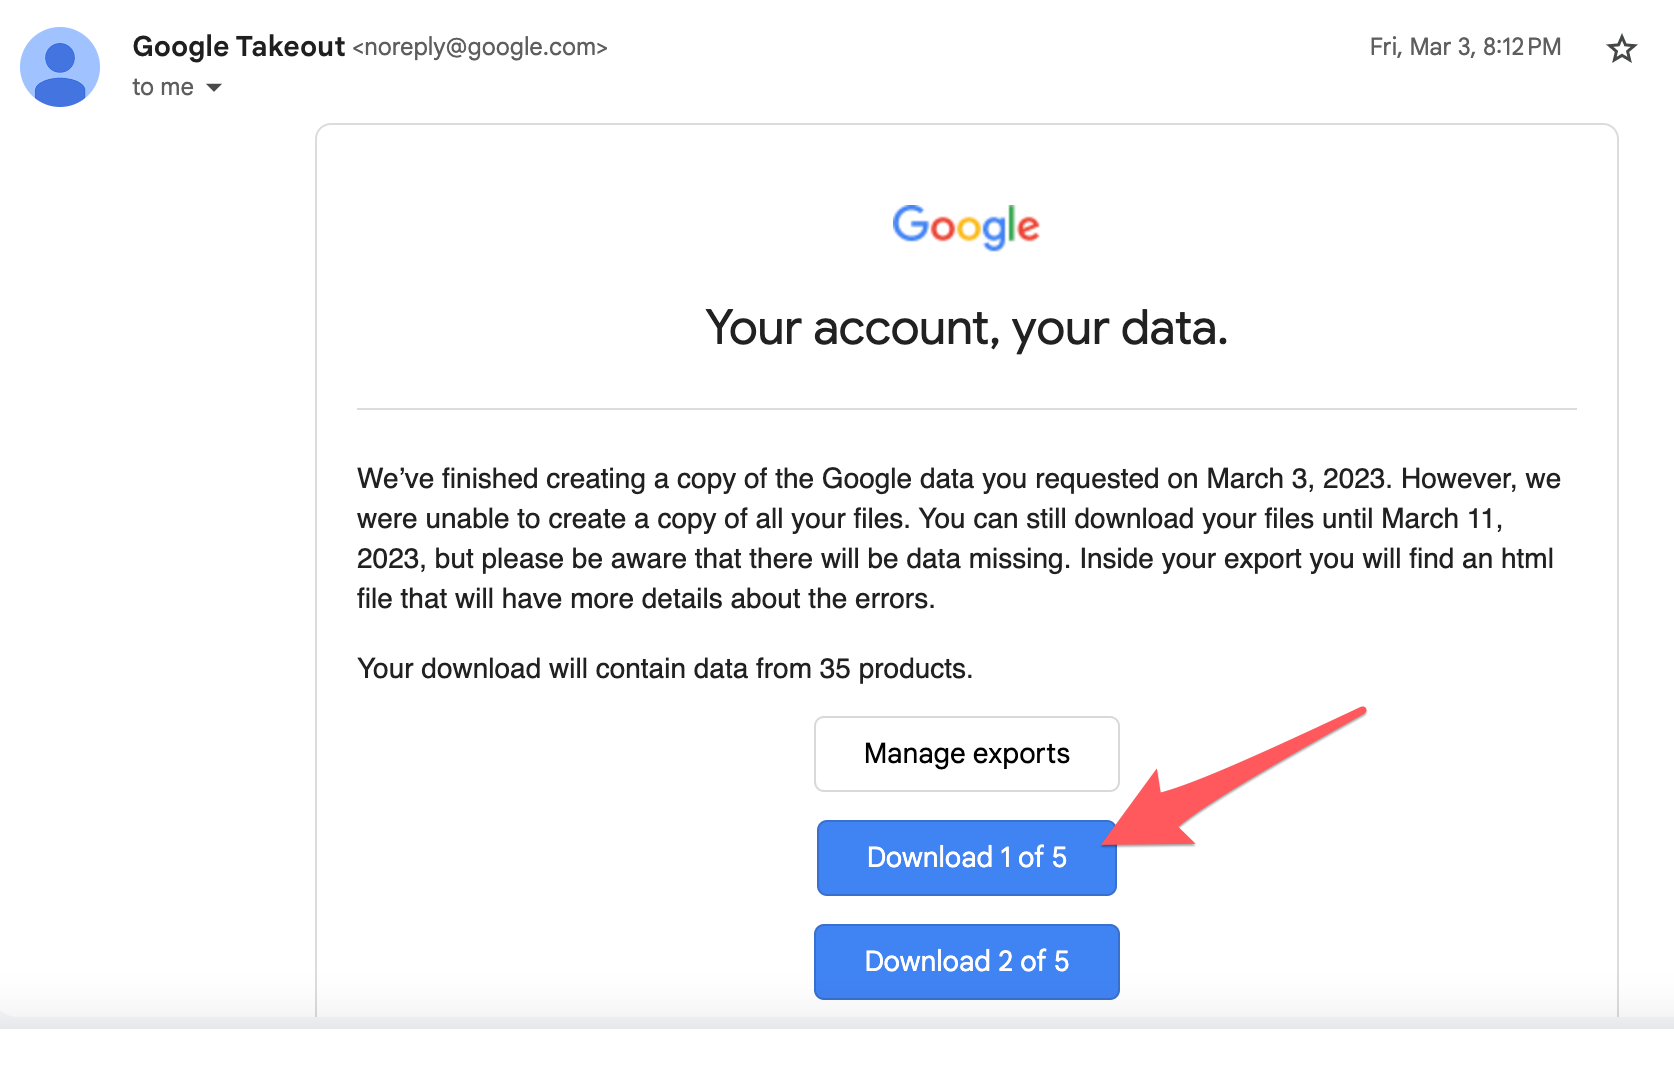 Google Takeout download links in email